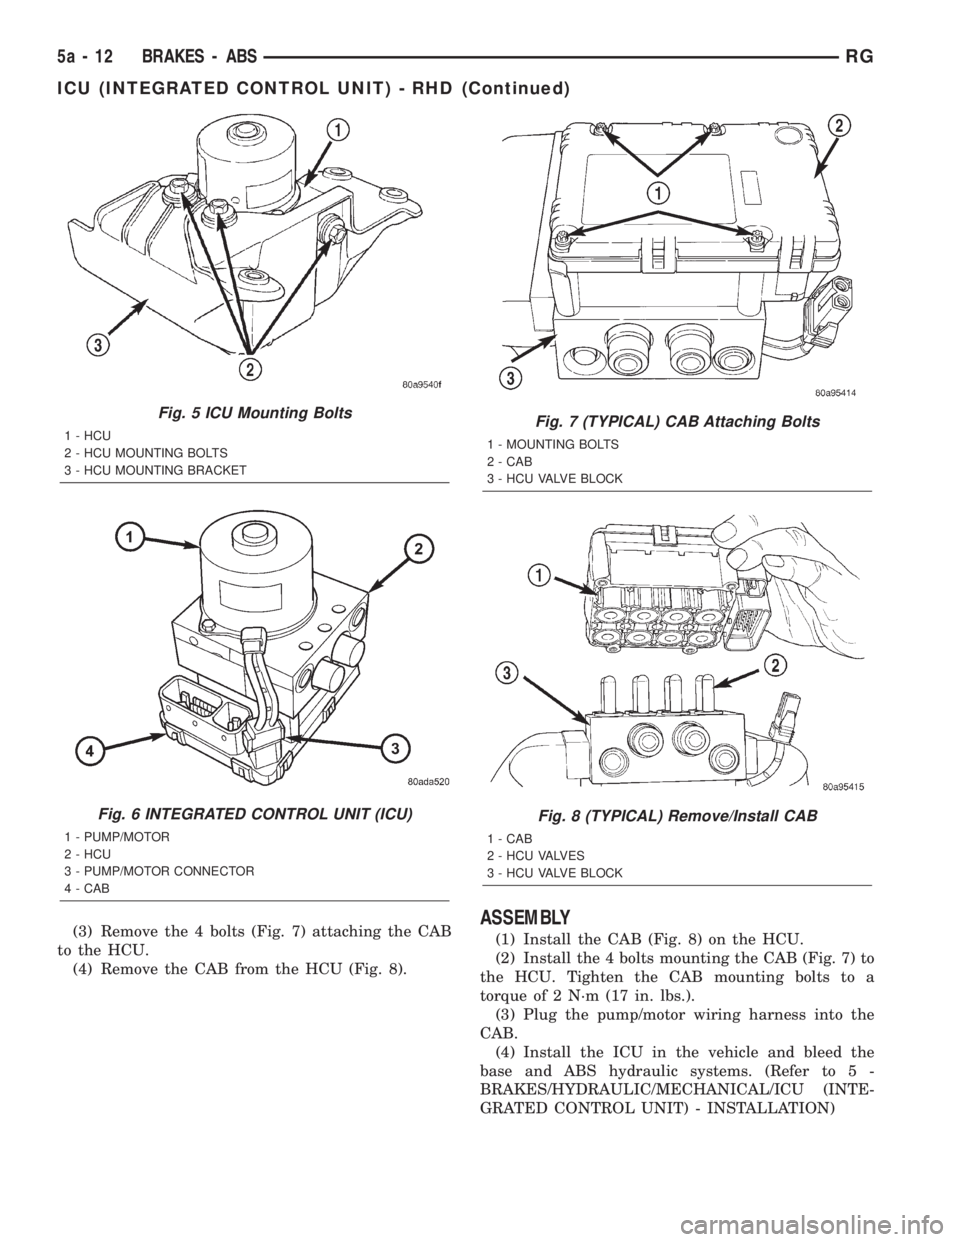 CHRYSLER VOYAGER 2001  Service Manual (3) Remove the 4 bolts (Fig. 7) attaching the CAB
to the HCU.
(4) Remove the CAB from the HCU (Fig. 8).ASSEMBLY
(1) Install the CAB (Fig. 8) on the HCU.
(2) Install the 4 bolts mounting the CAB (Fig. 